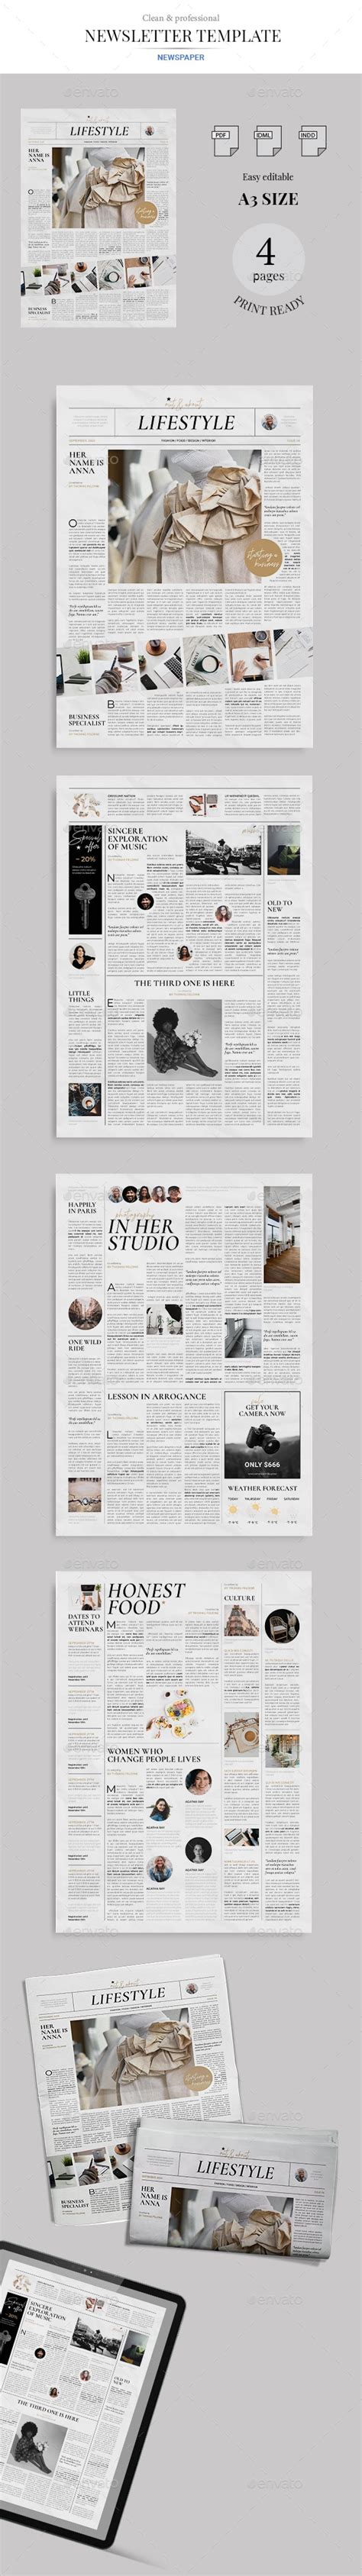 Lifestyle Newspaper By Graphicallab Graphicriver